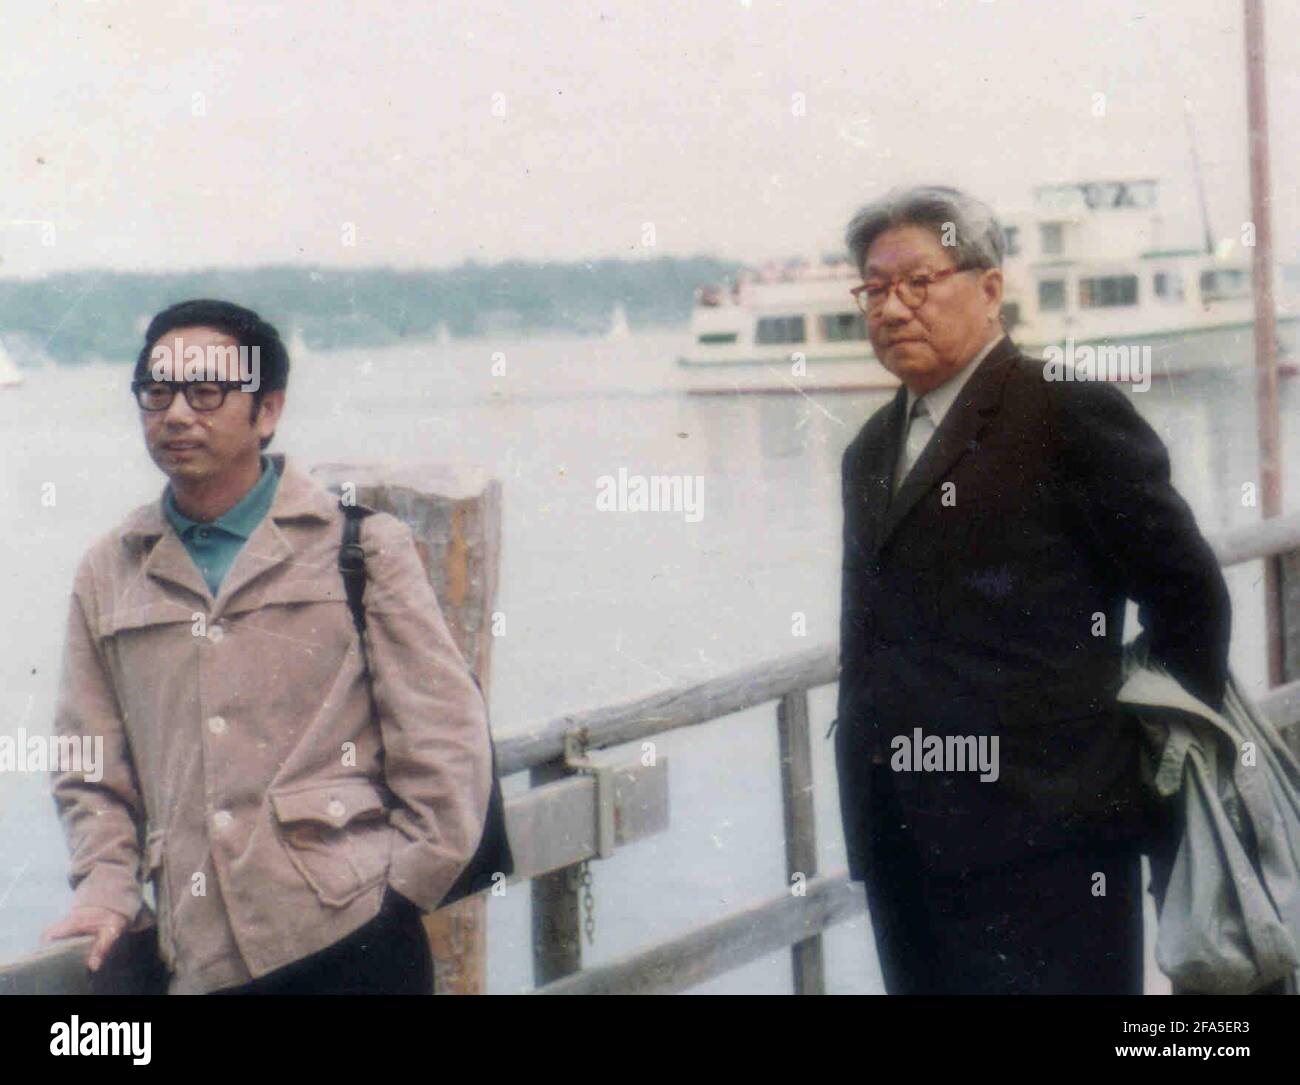 (210423) -- CHENGDU, April 23, 2021 (Xinhua) -- File photo taken in autumn 1982 shows Yang Wuneng (L) posing with his academic instructor Feng Zhi, another renowned figure in the German studies, by the Rhine River in Germany. In a career that spans over 60 years, Yang Wuneng has translated 31 German classics into the Chinese language, including 'Faust', 'Selected Poems of Heinrich Heine' and 'Immensee.' Many of his translations are still bestselling books in some bookstores. His translation of 'Grimms' Fairy Tales,' for instance, has been popular among Chinese readers for many generations. Tod Stock Photo